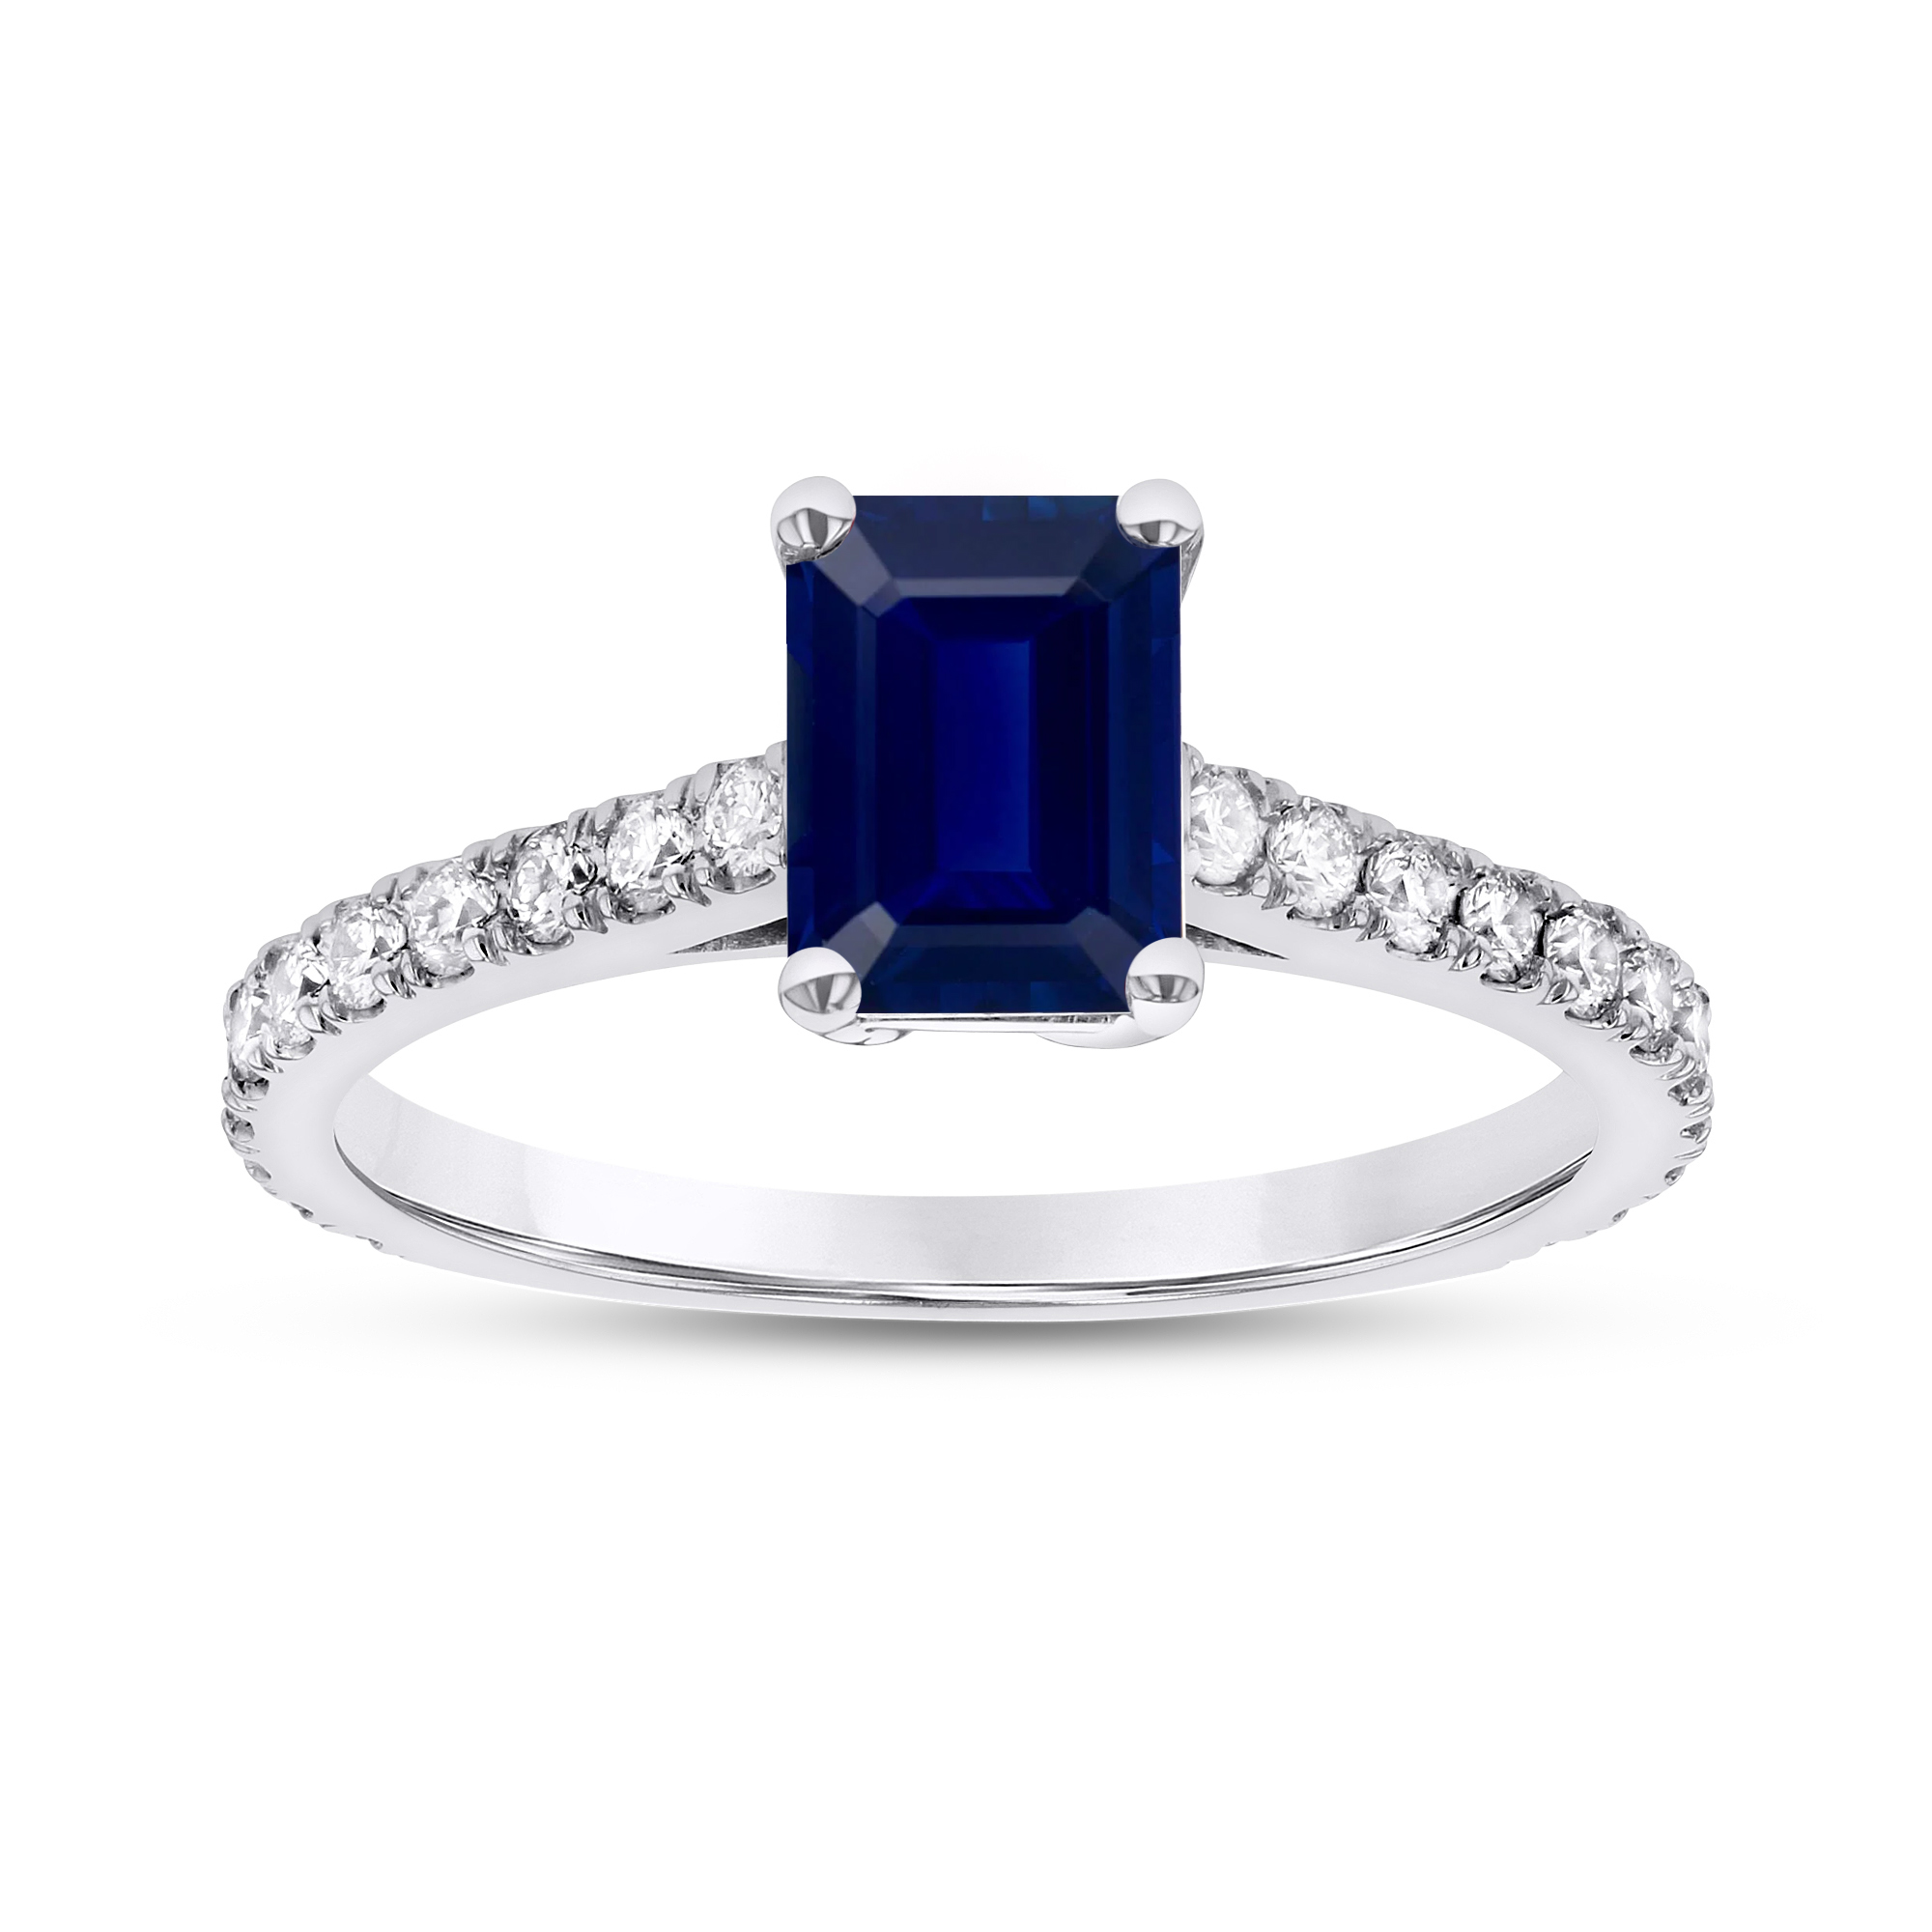 View 0.36ctw Diamond and Emerald Cut Sapphire Engagement Ring in 14k White Gold